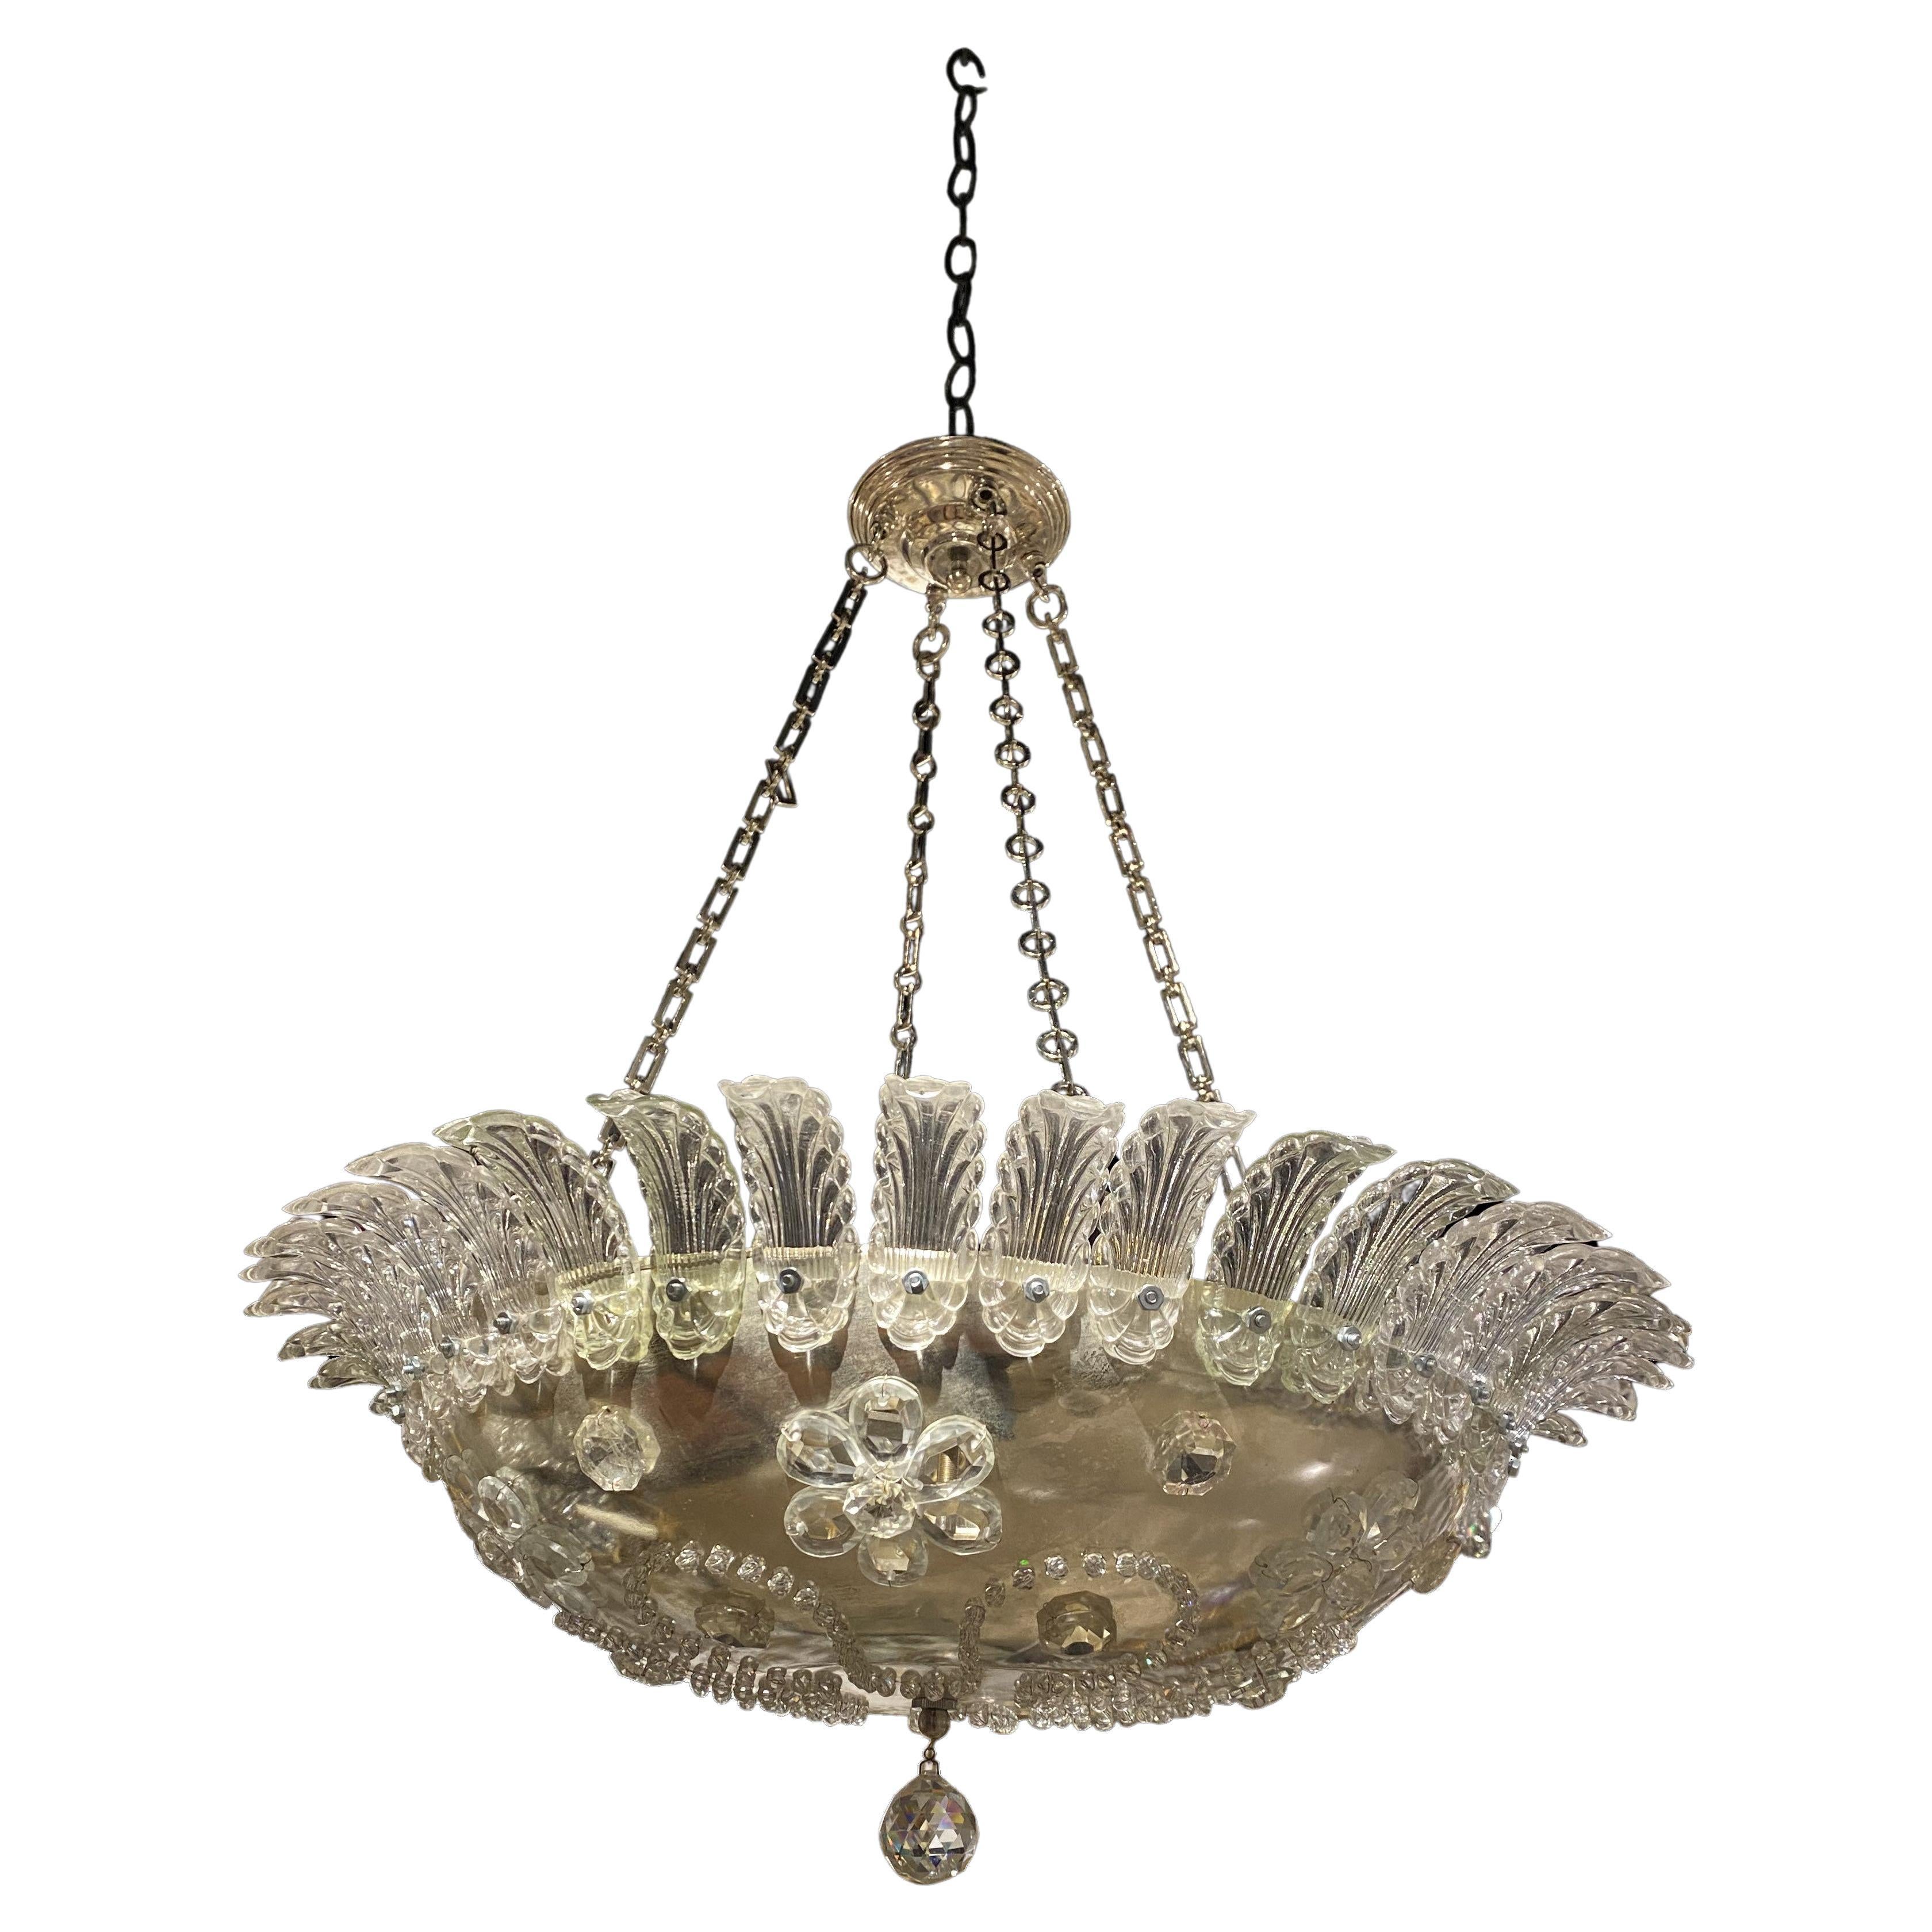 1930's French Silver Plated Light Fixture with Crystals Flowers  For Sale